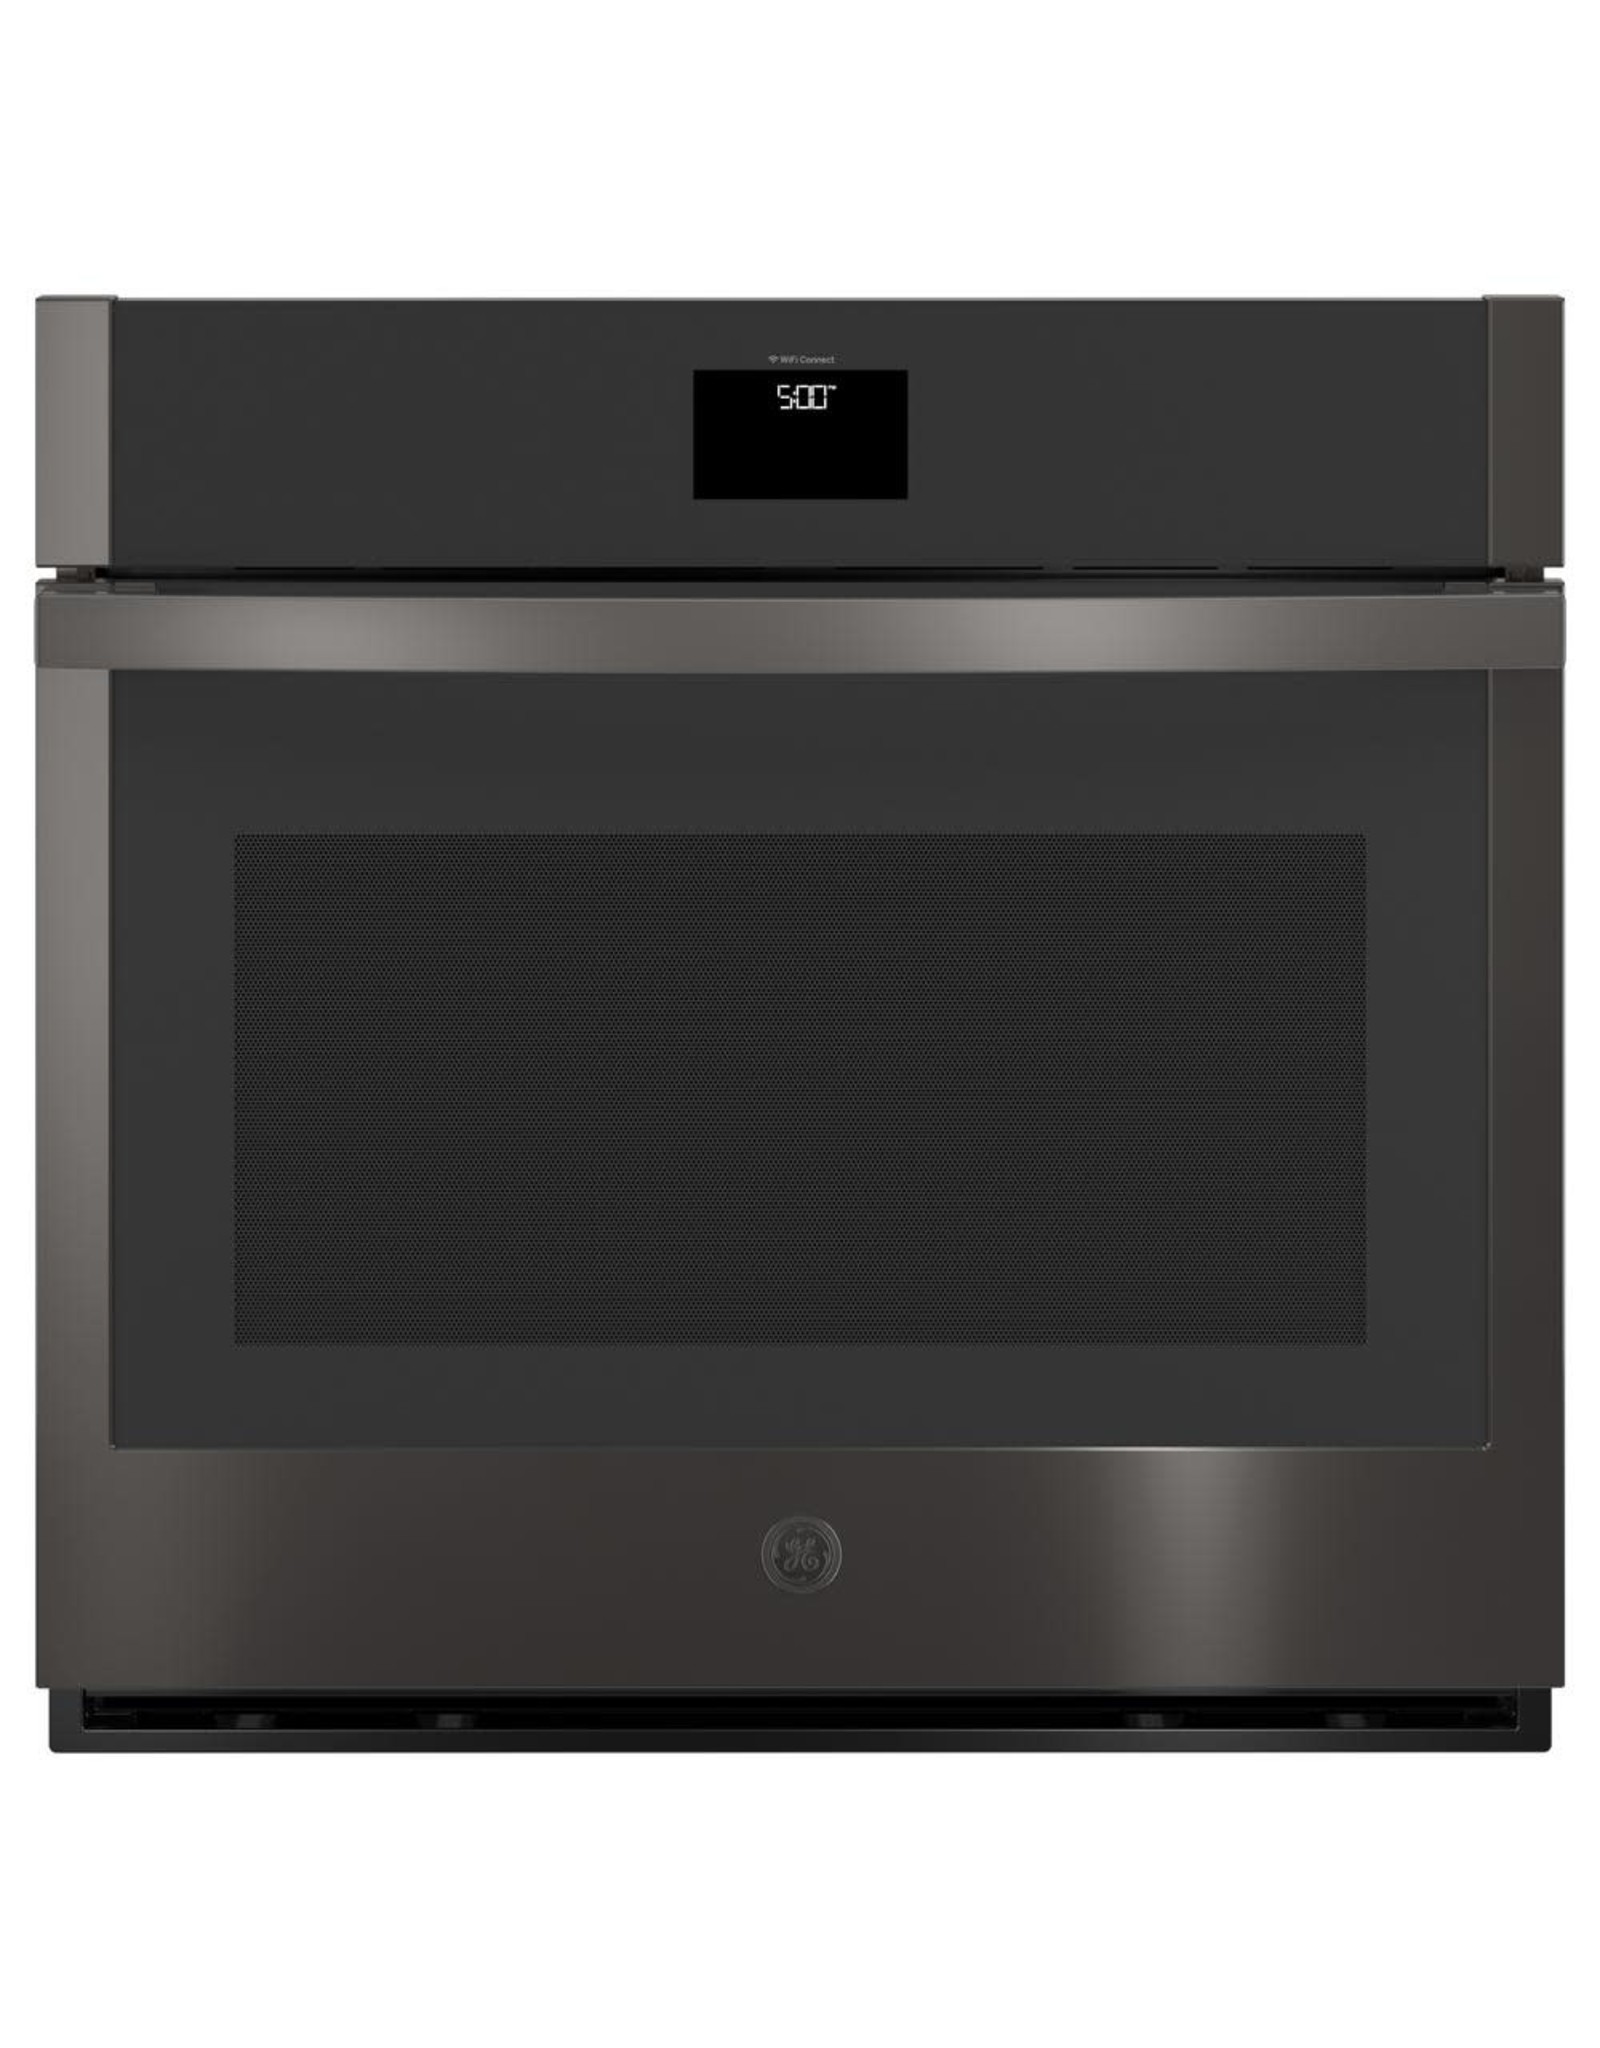 JTS5000bn 30 in. 5.0 cu. ft. Smart Single Electric Wall Oven with Self-Cleaning Convection in Stainless Steel